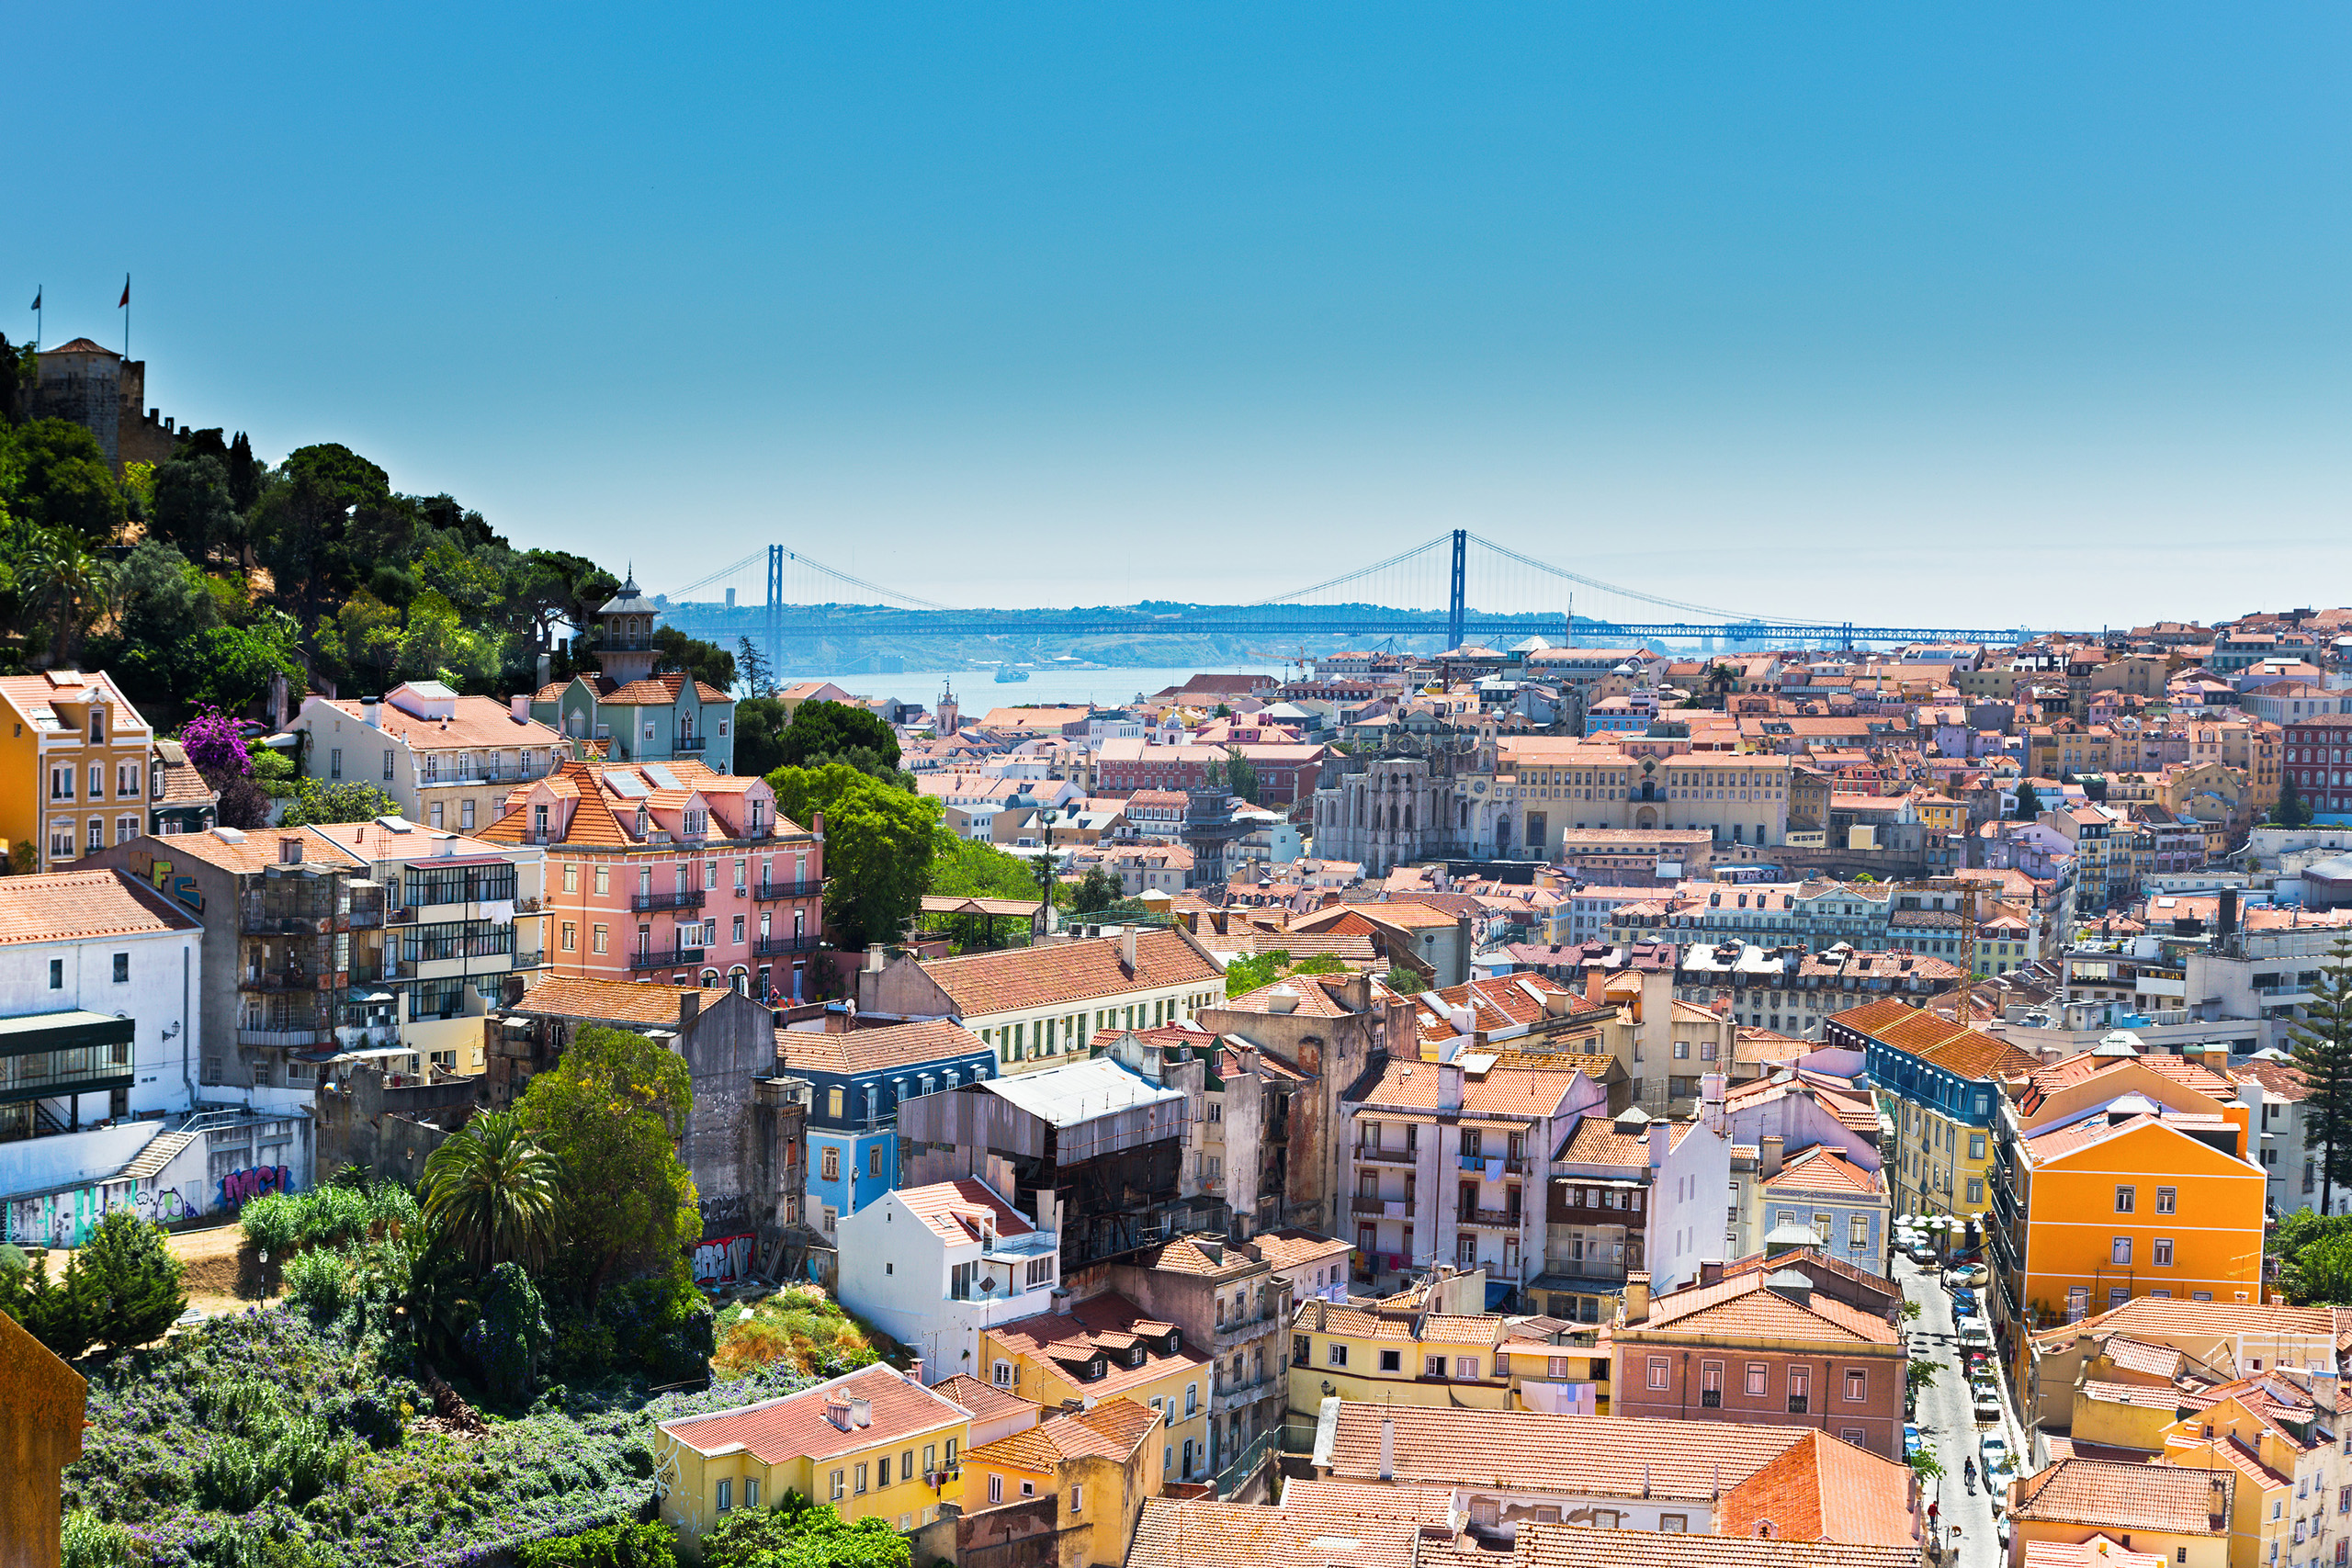 Lisbon is considered the 3rd most entertaining city by the Time Out London